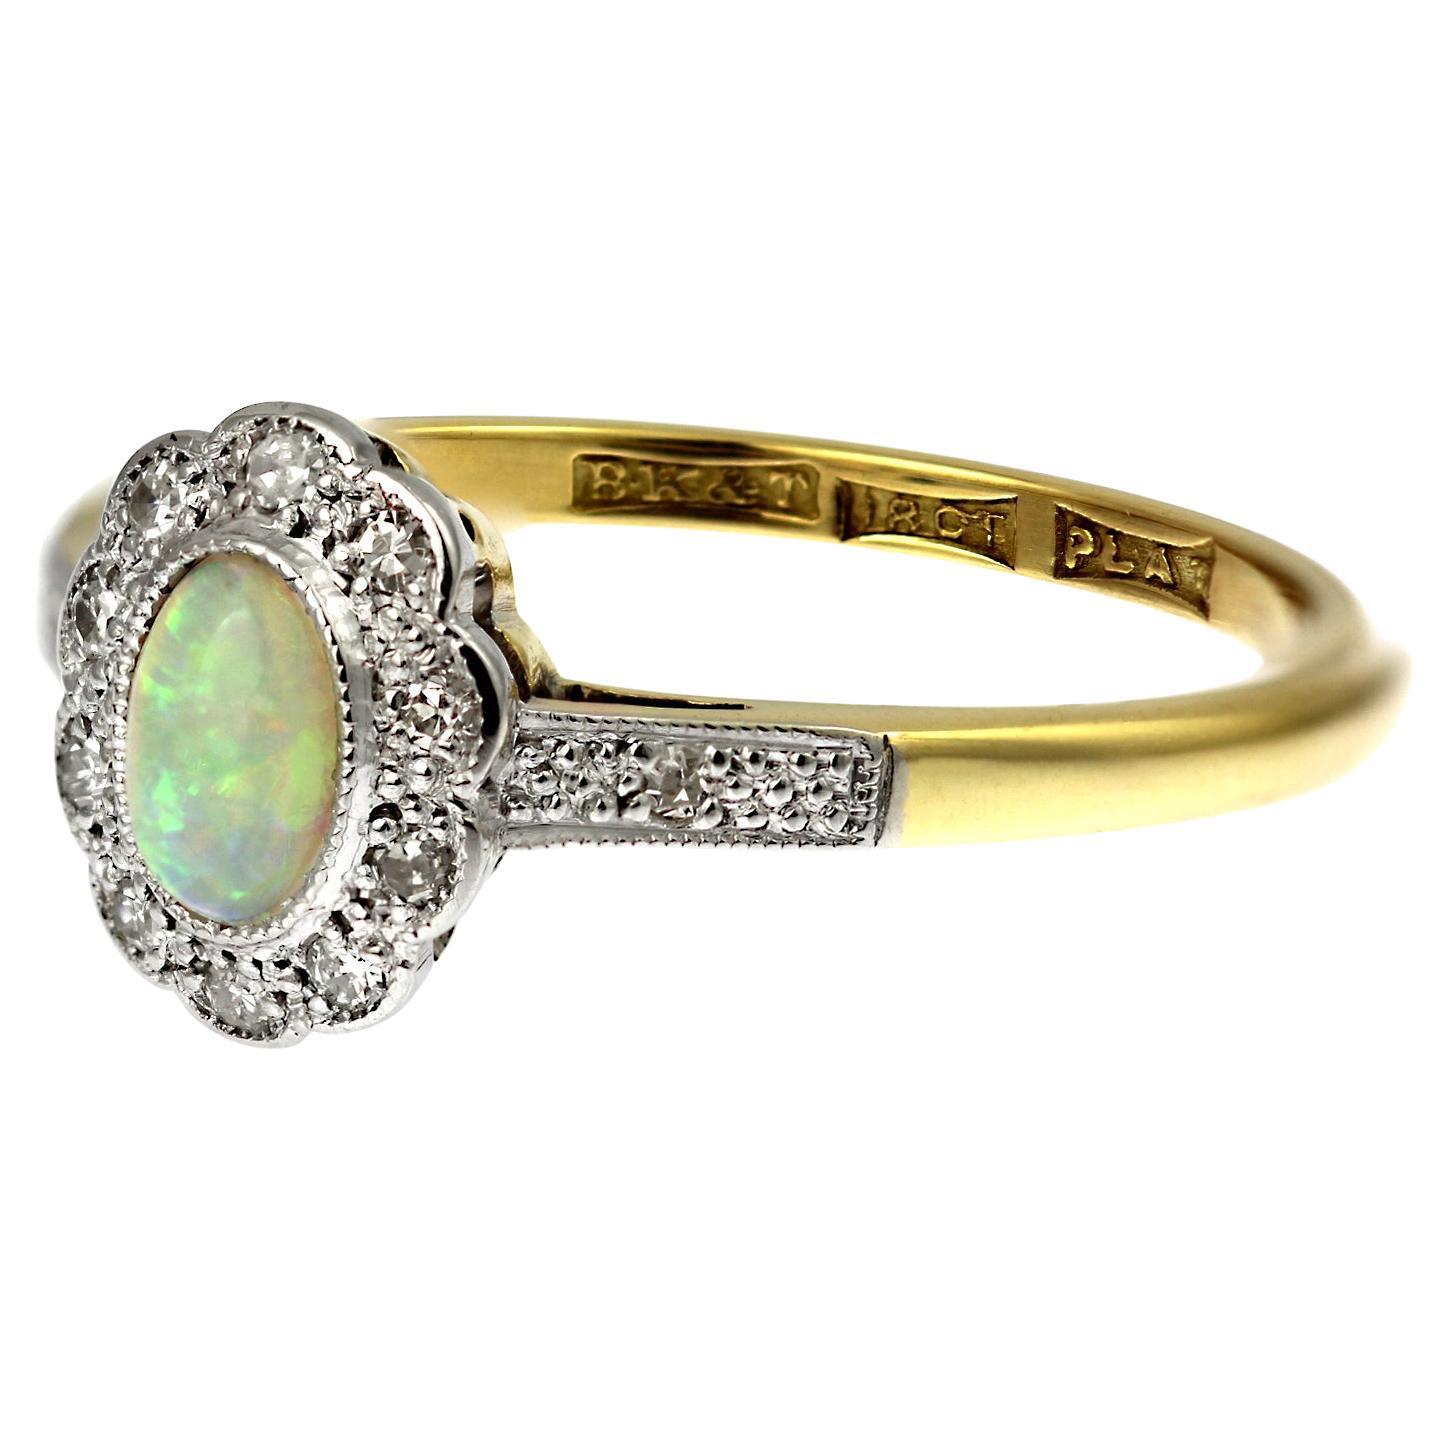 Retro, 18ct yellow gold and platinum, opal and diamond cluster ring, size O1/2